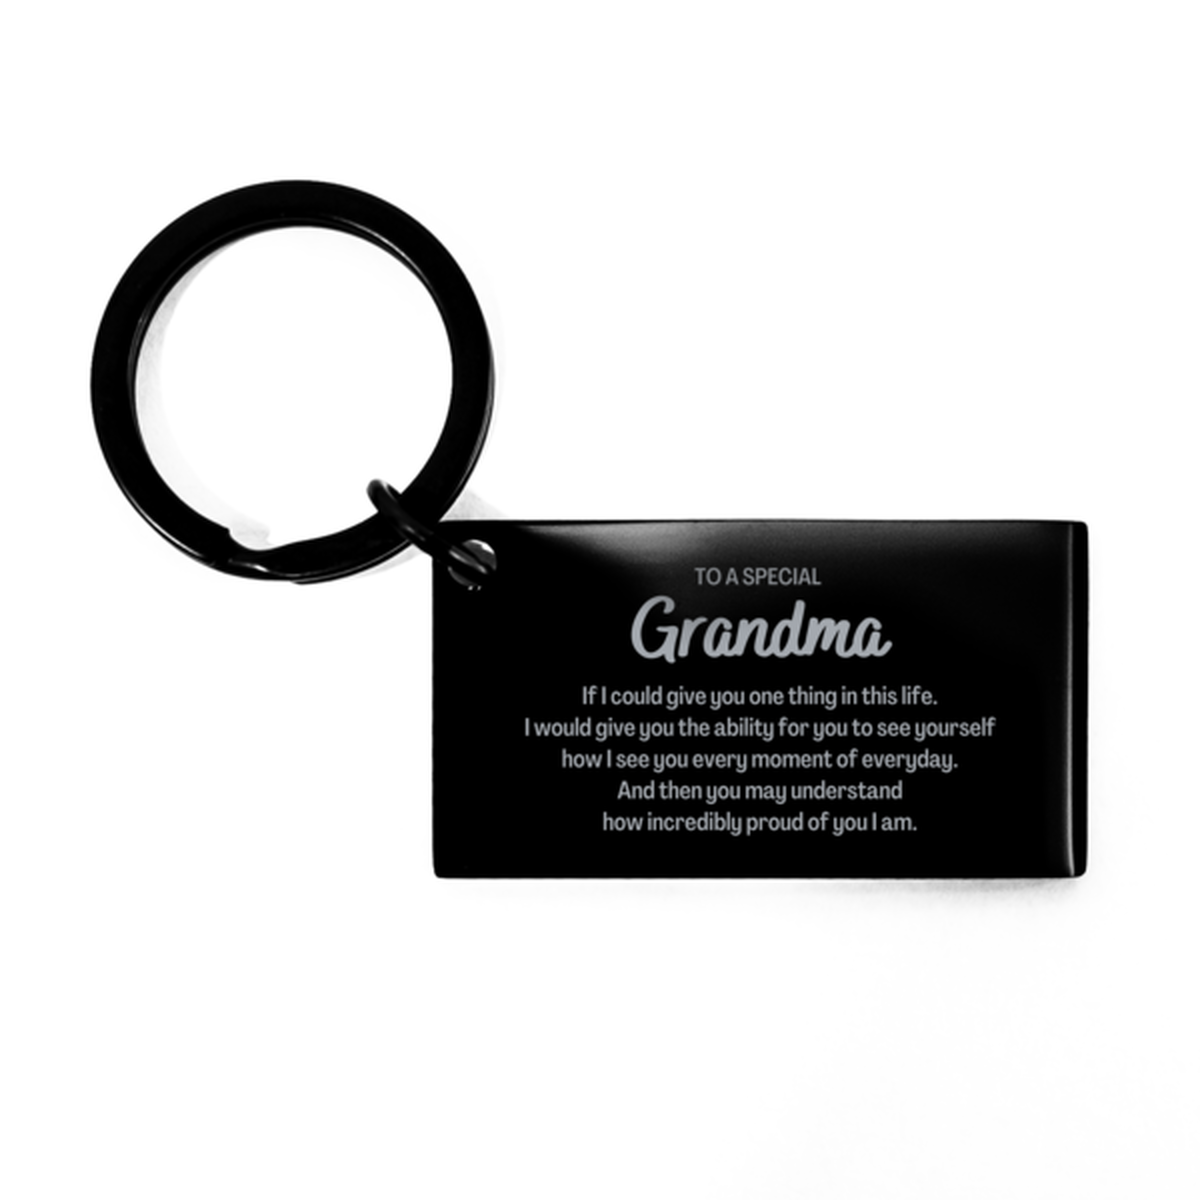 To My Grandma Keychain, Gifts For Grandma Engraved, Inspirational Gifts for Christmas Birthday, Epic Gifts for Grandma To A Special Grandma how incredibly proud of you I am